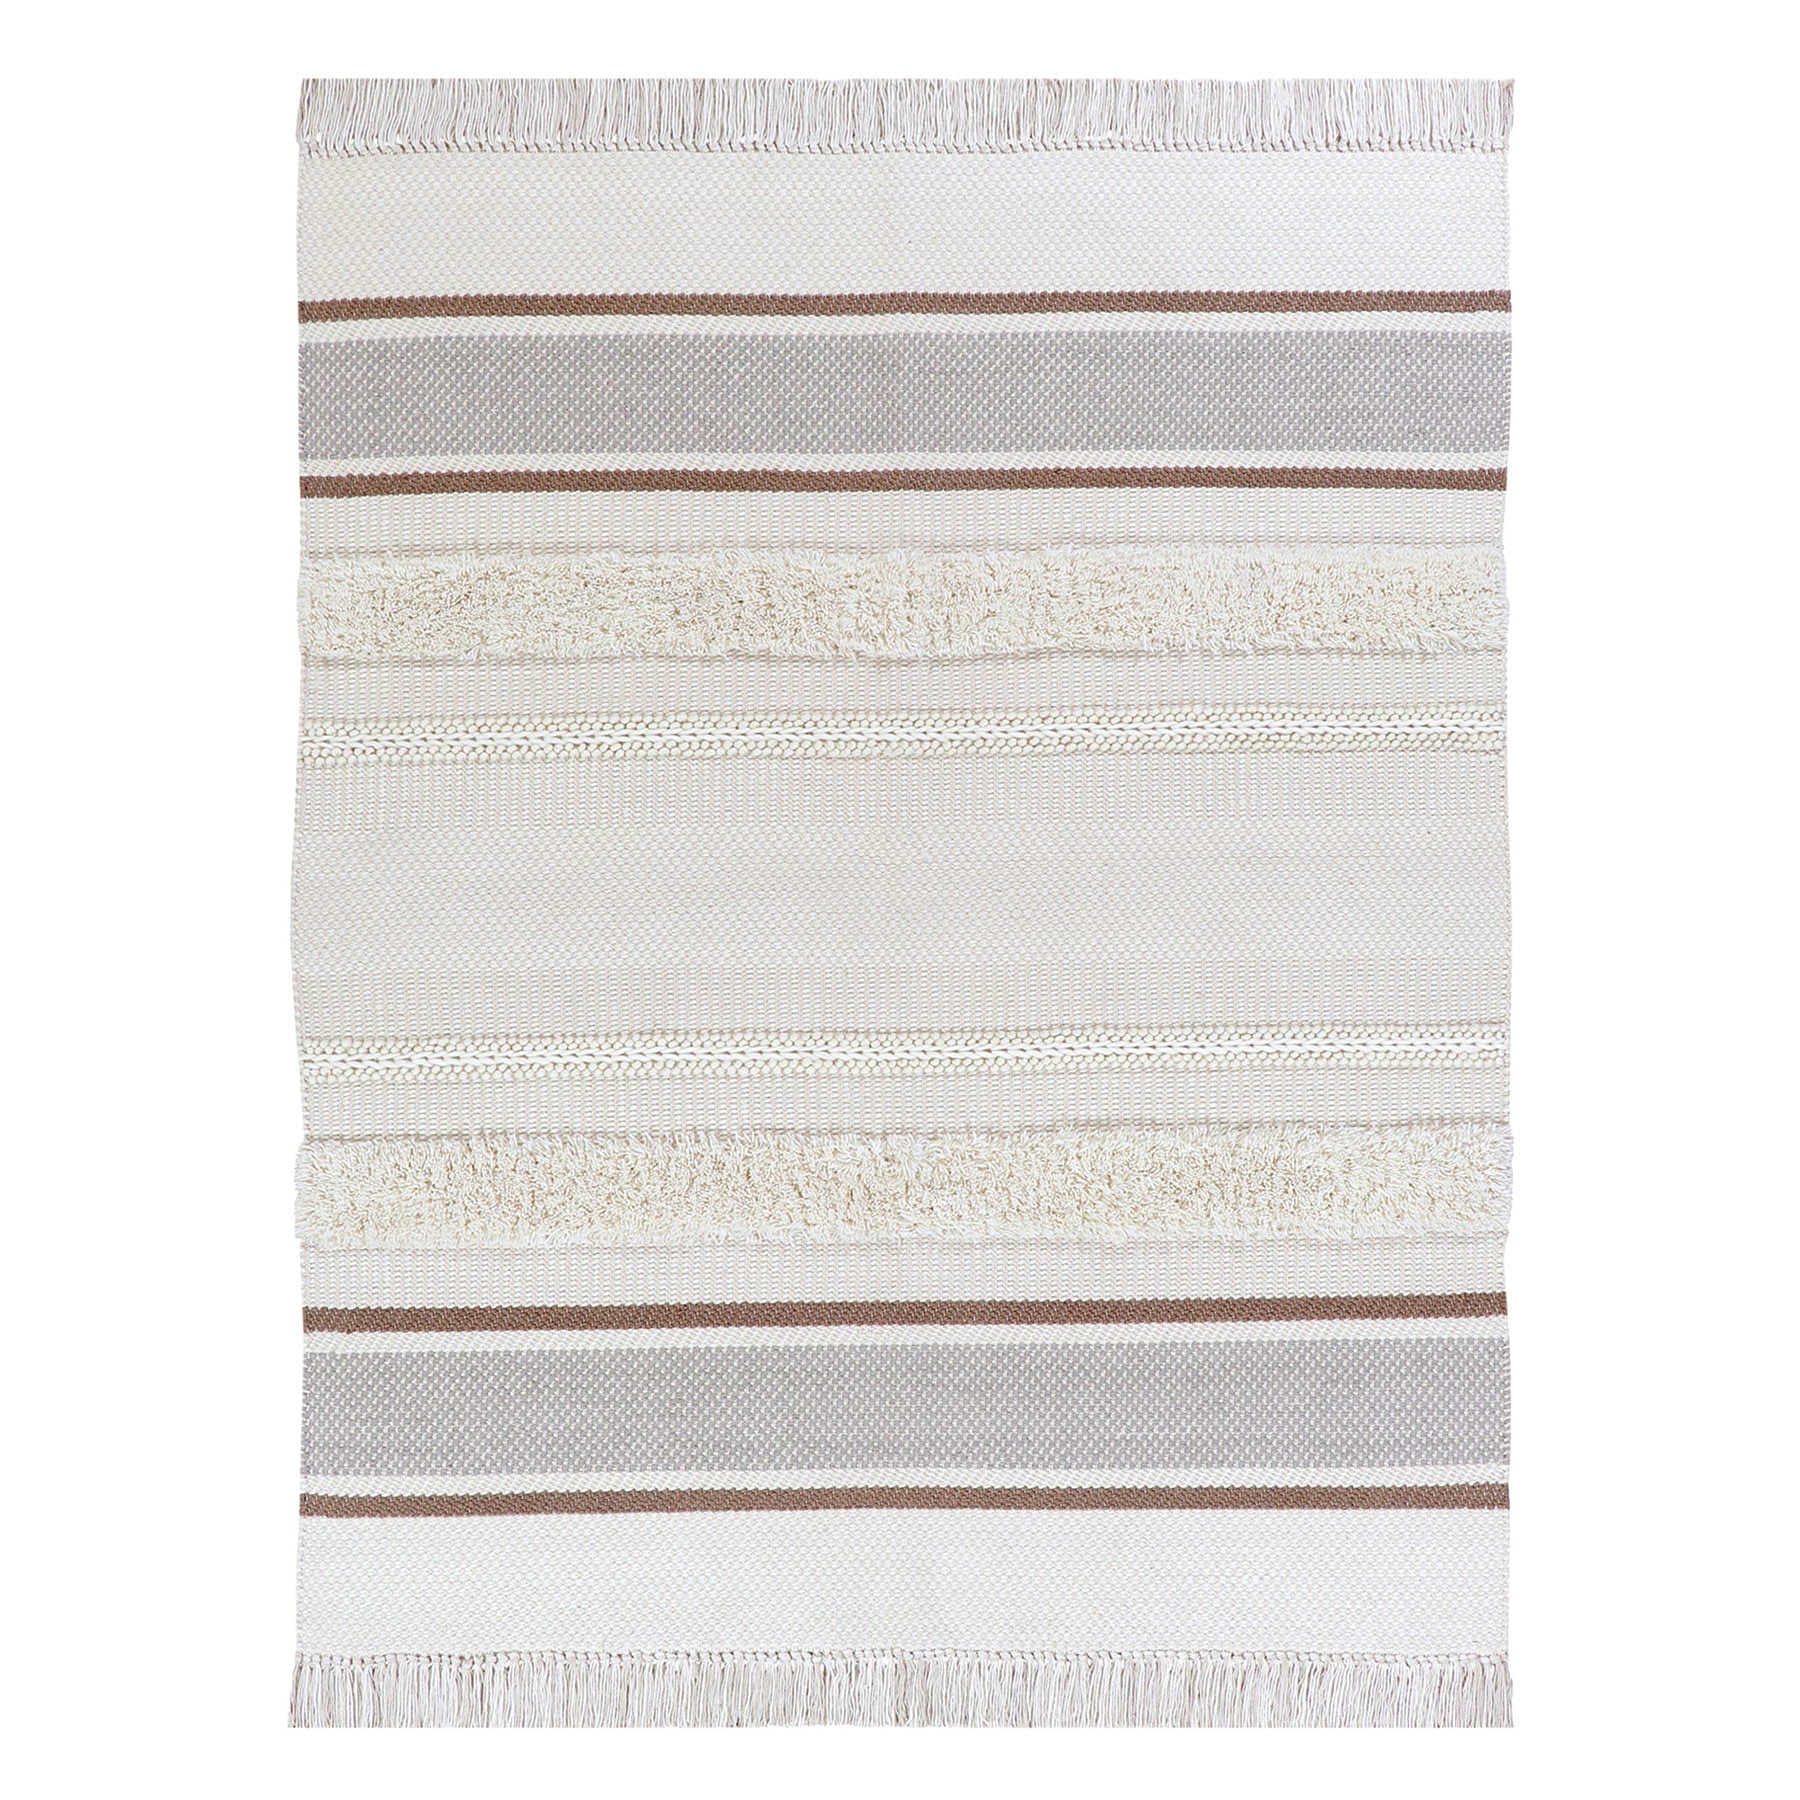 (B801) Honeybloom Ivory Striped Area Rug, 8x10 - nybusiness